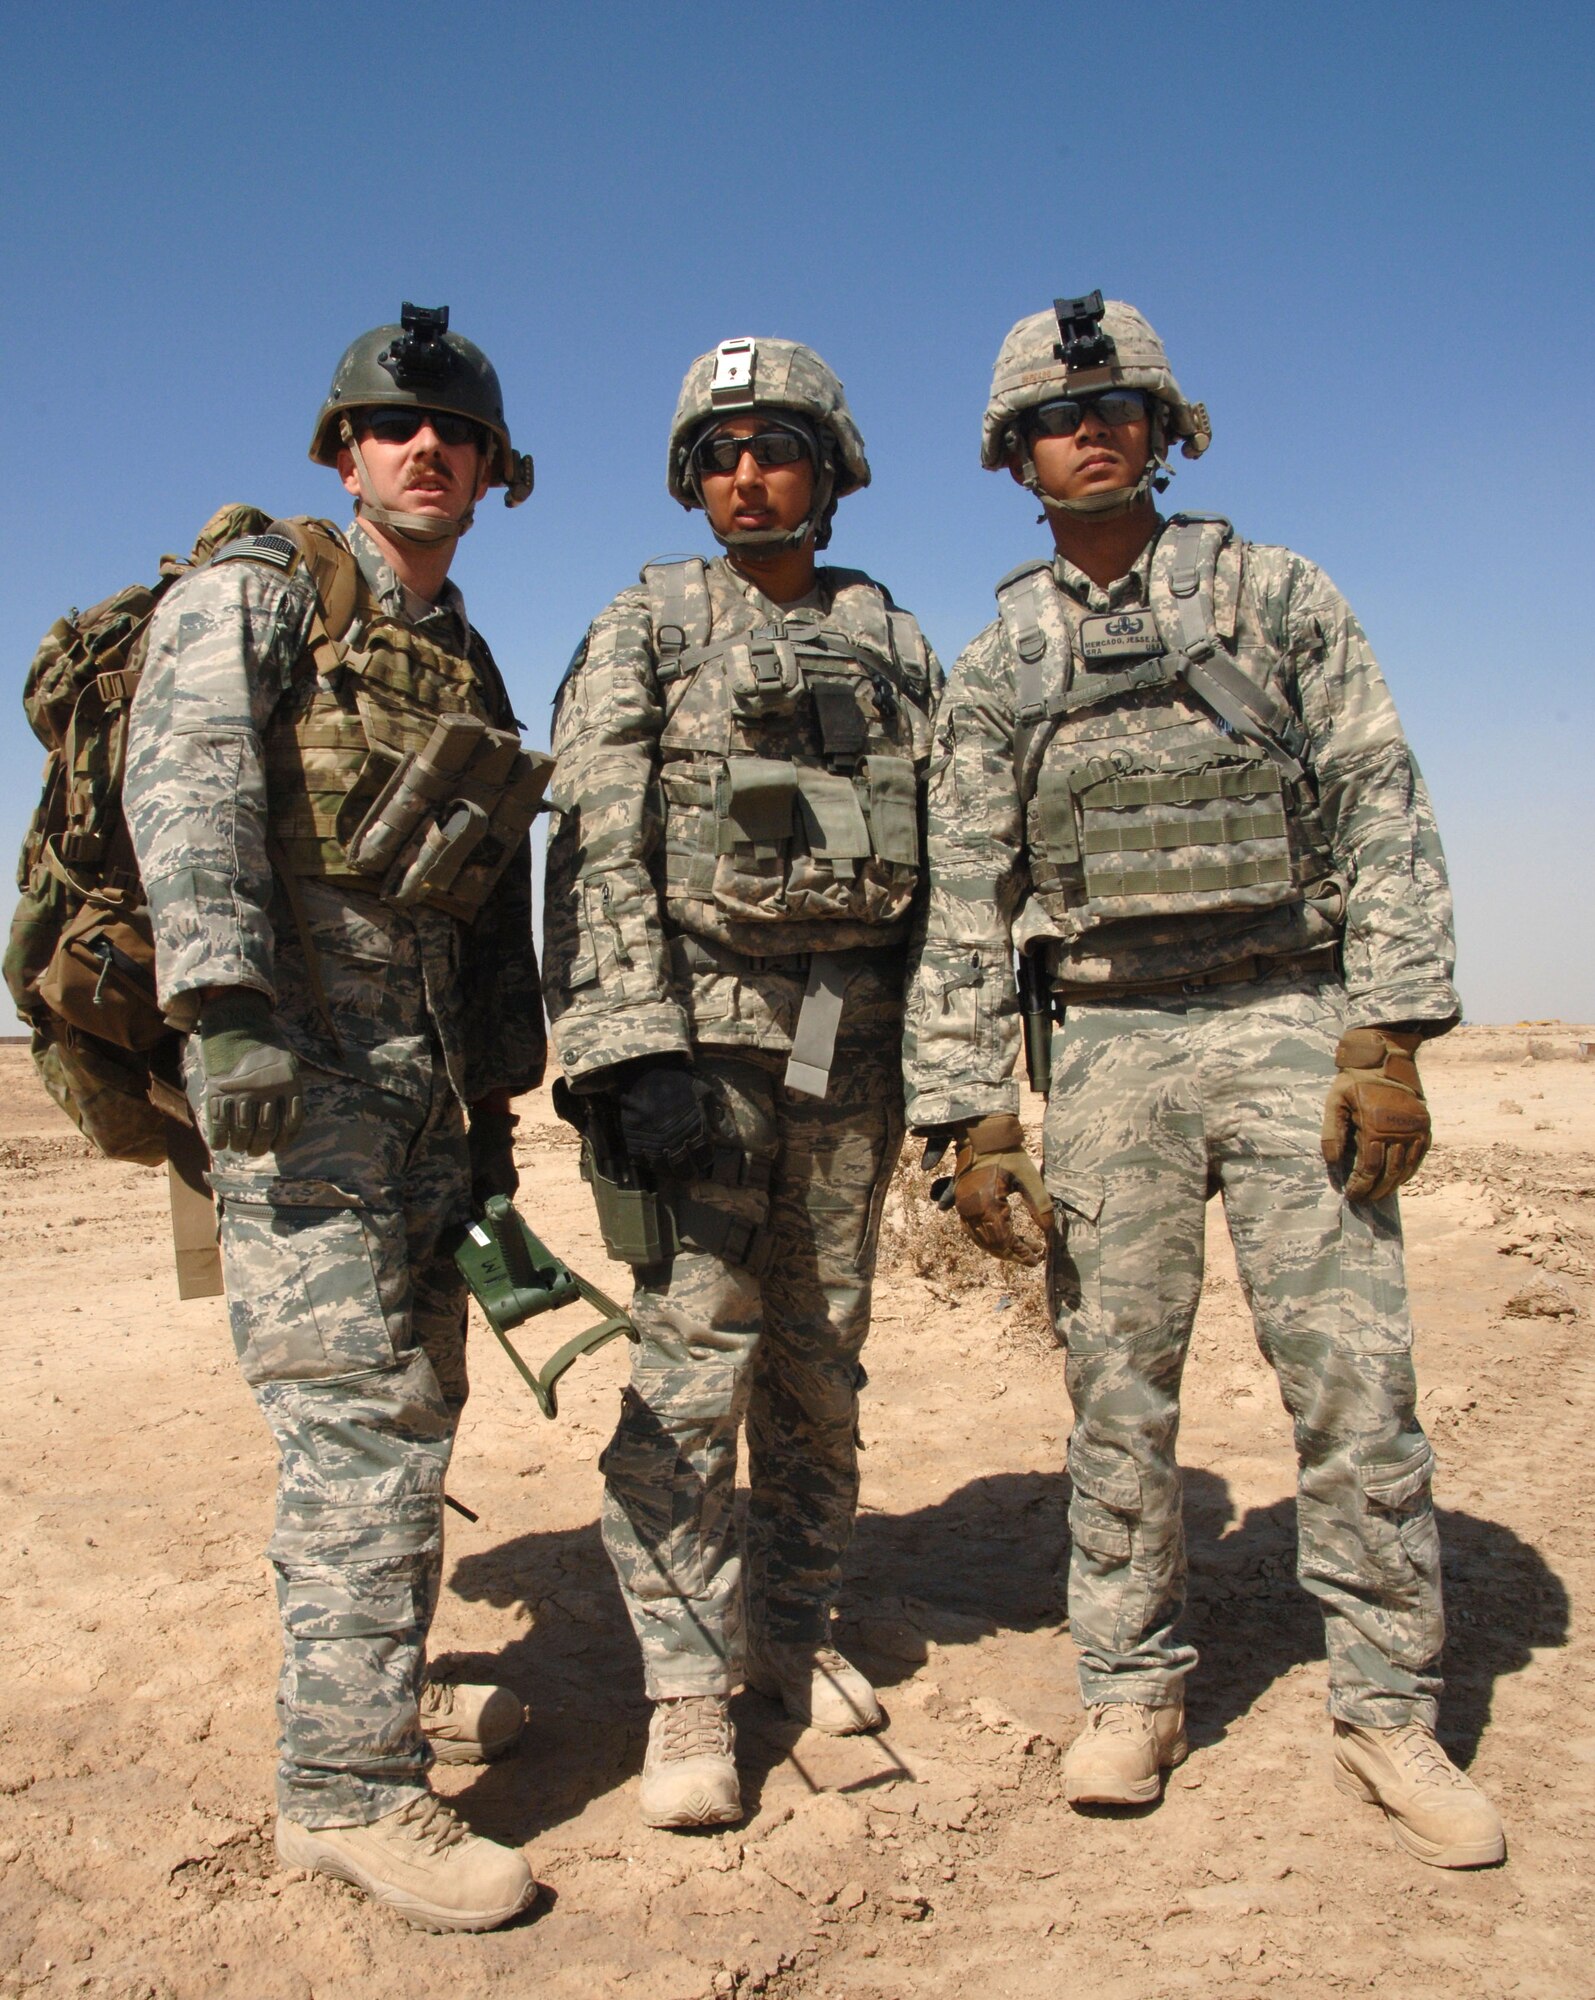 From left to right, Staff Sgt. Glenn Henthorn, Staff Sgt. Christin Merriweather and Senior Airman Jesse Mercado, 407th Expeditionary Operations Support Squadron explosive ordnance disposal technicians, scan a village while discussing a possible hazard during a training scenario March 3, 2011, at Ali Air Base, Iraq. (U.S. Air Force photo by Staff Sgt. R. Michael Longoria/Released)